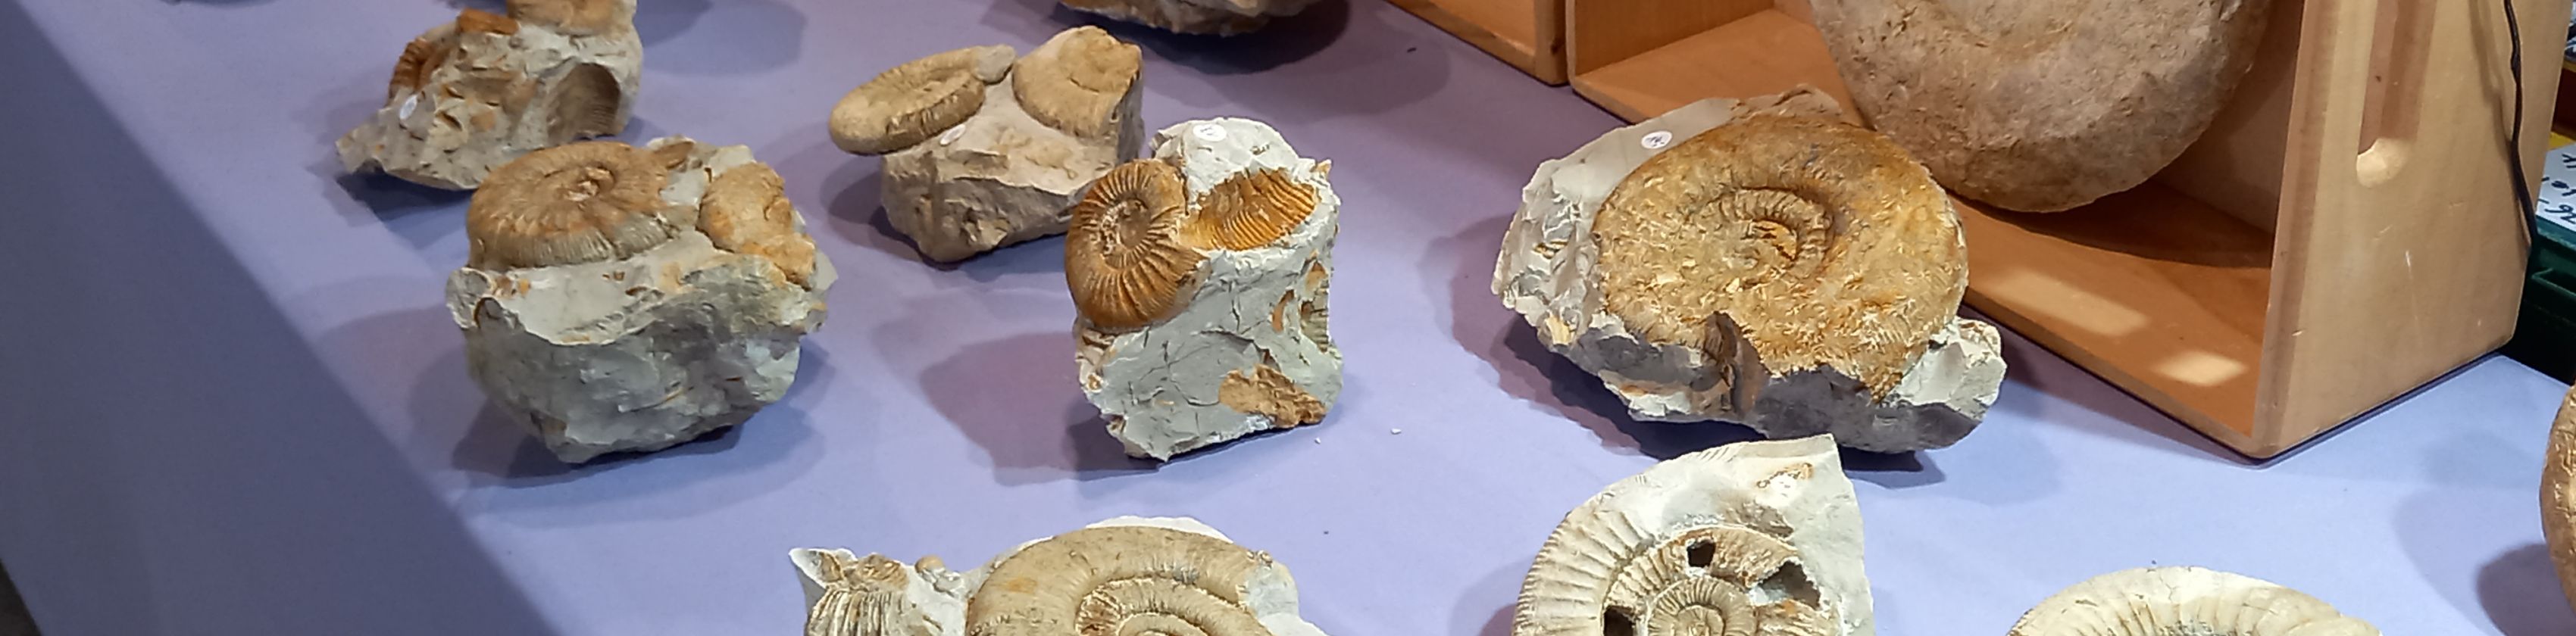 47th Mineral and Fossil Days Freiburg